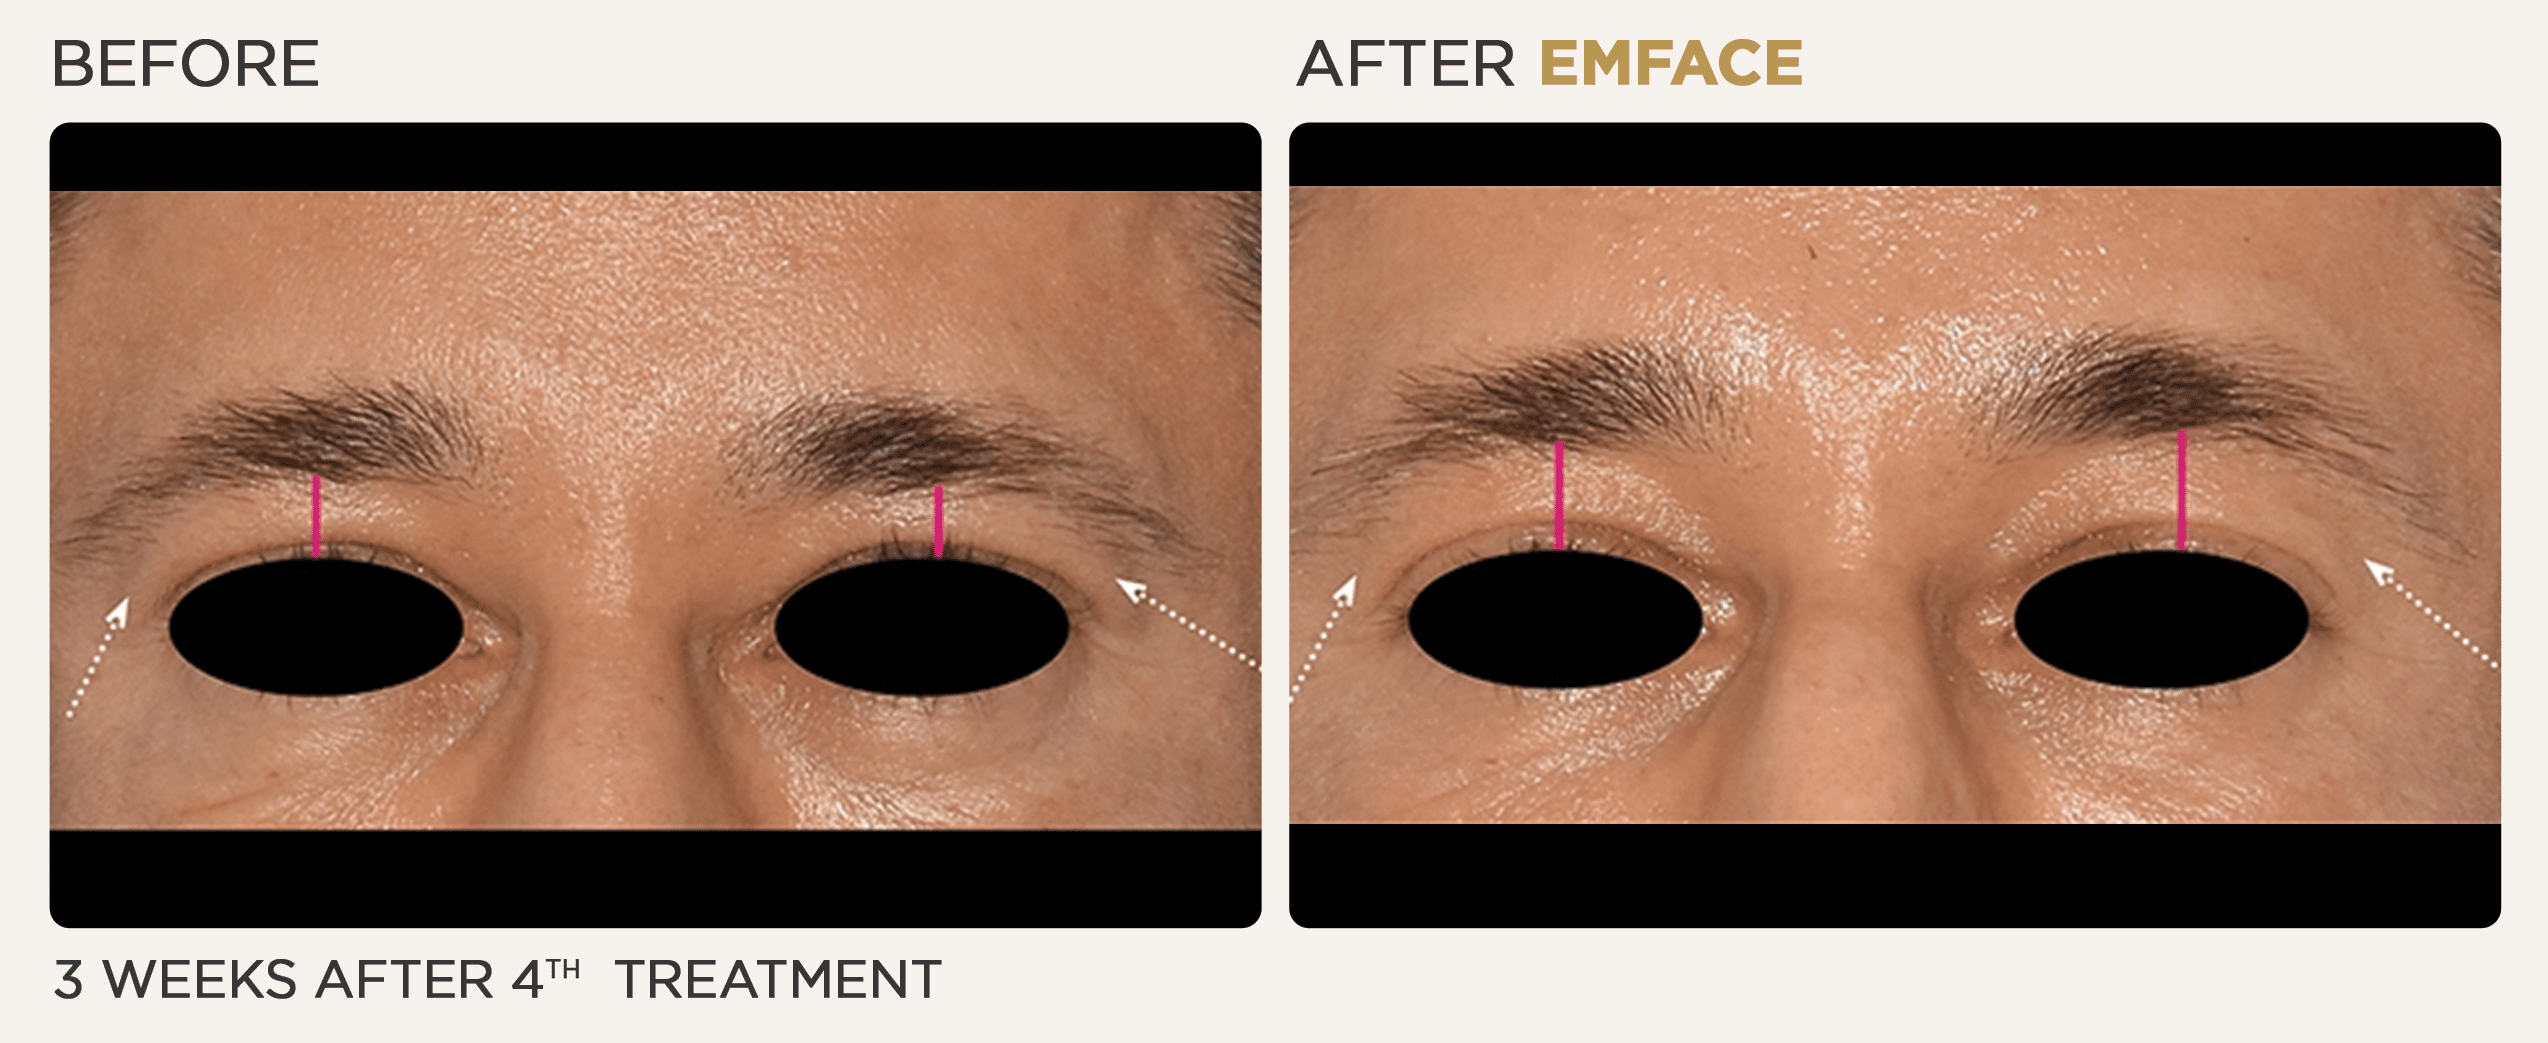 Man's eyebrow showing before and after results from EMface treatment at Vitalyc Medspa in Addison.